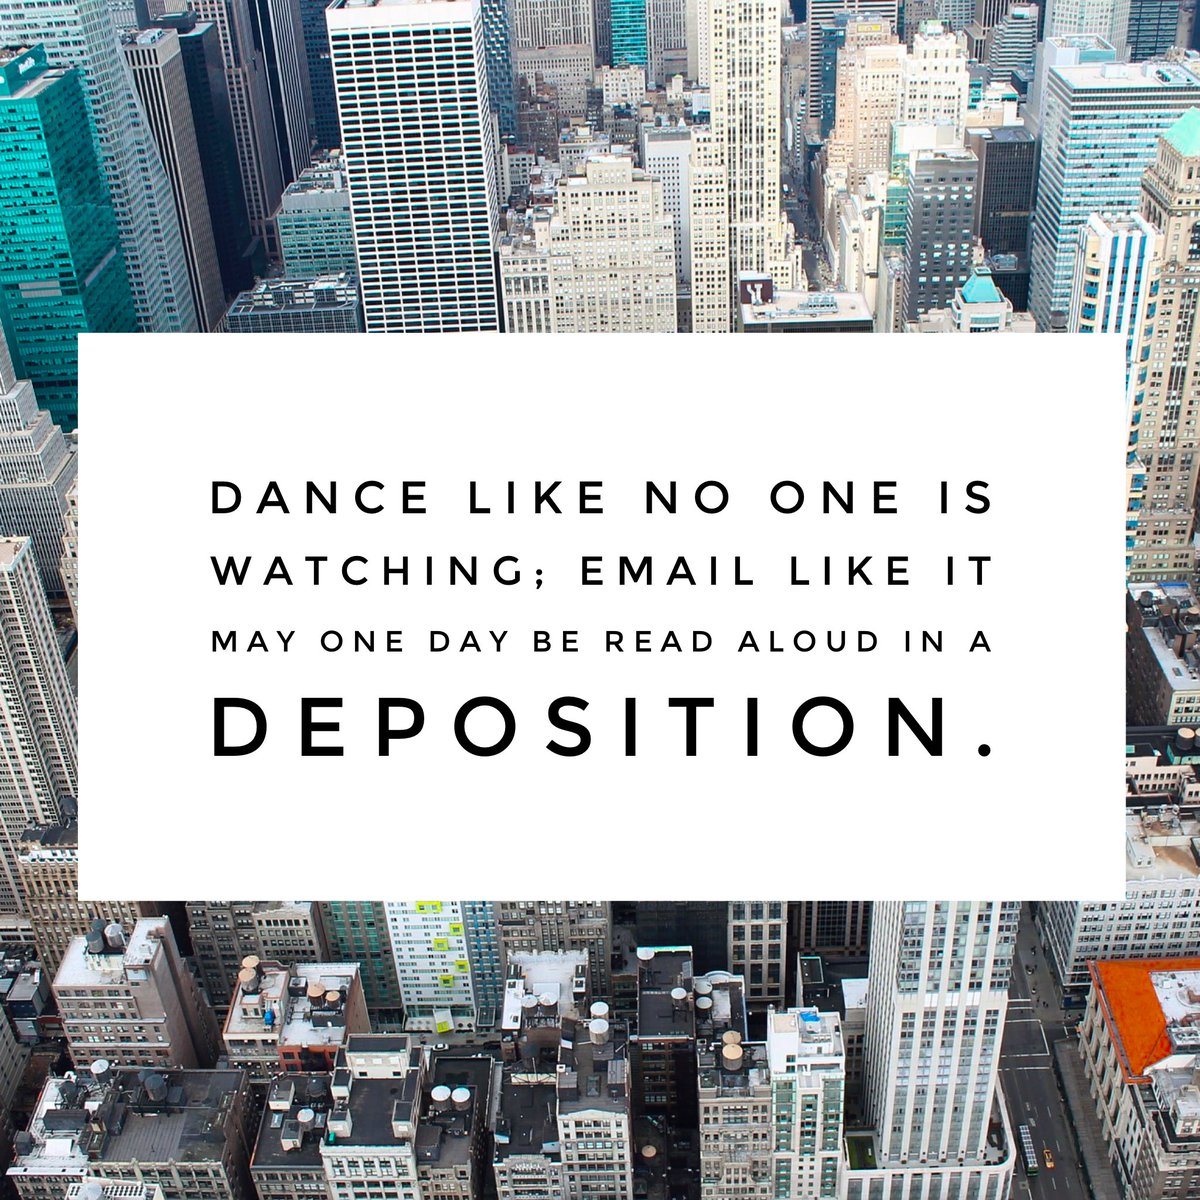 Dance like no one is watching, email like it may one day be read aloud in a deposition